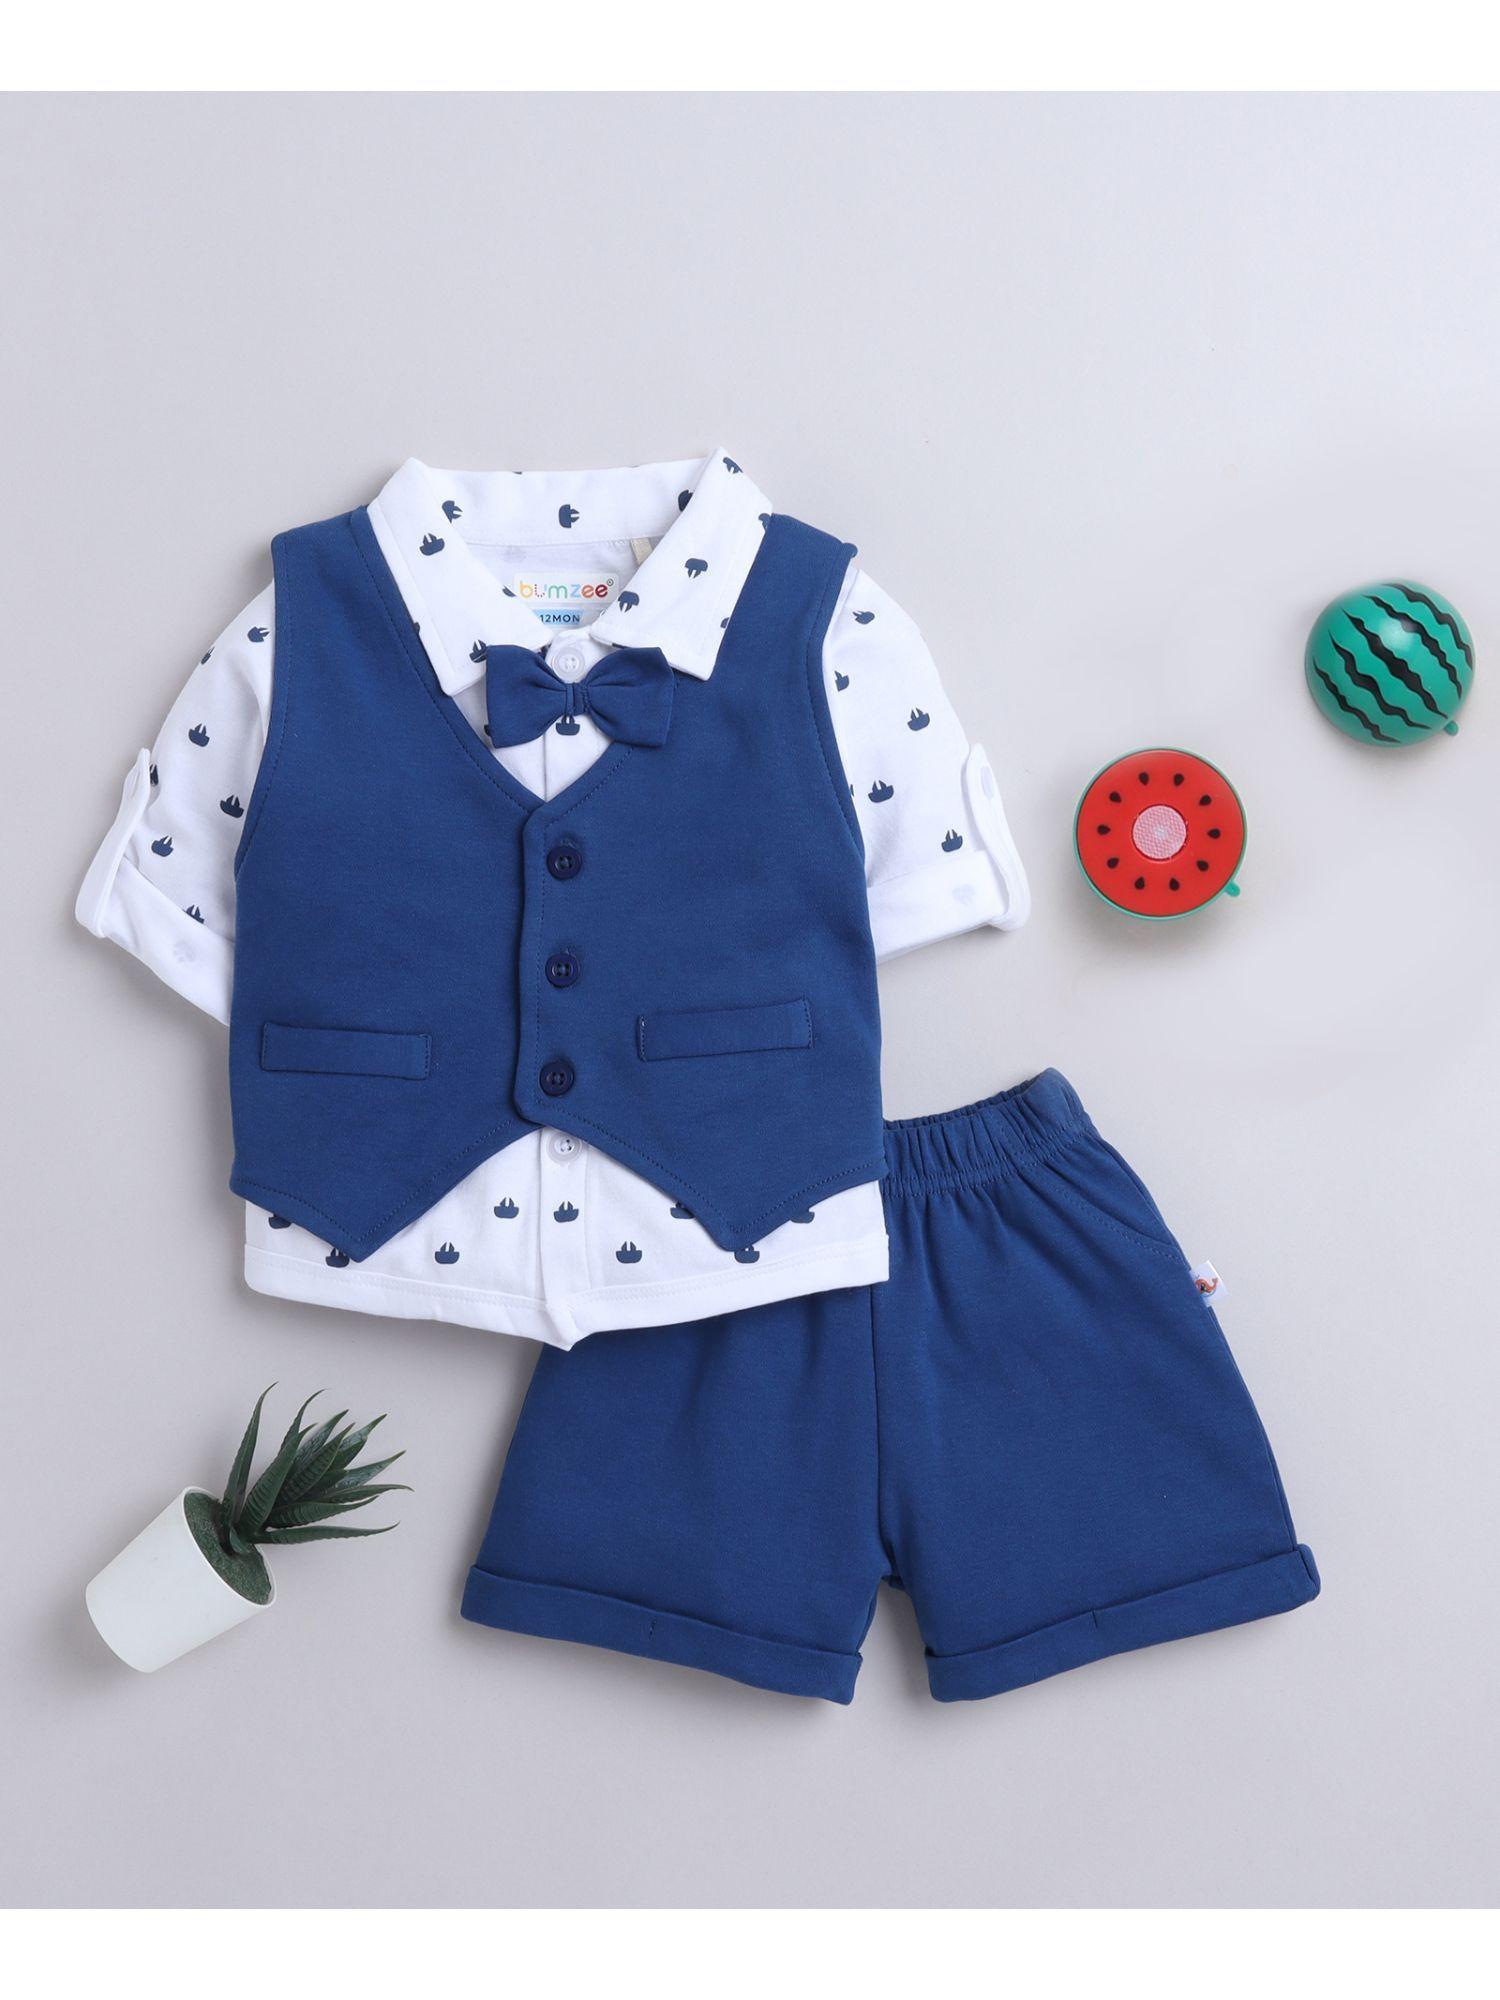 navy & white boys shirt waistcoat and shorts with applique bow (set of 4)